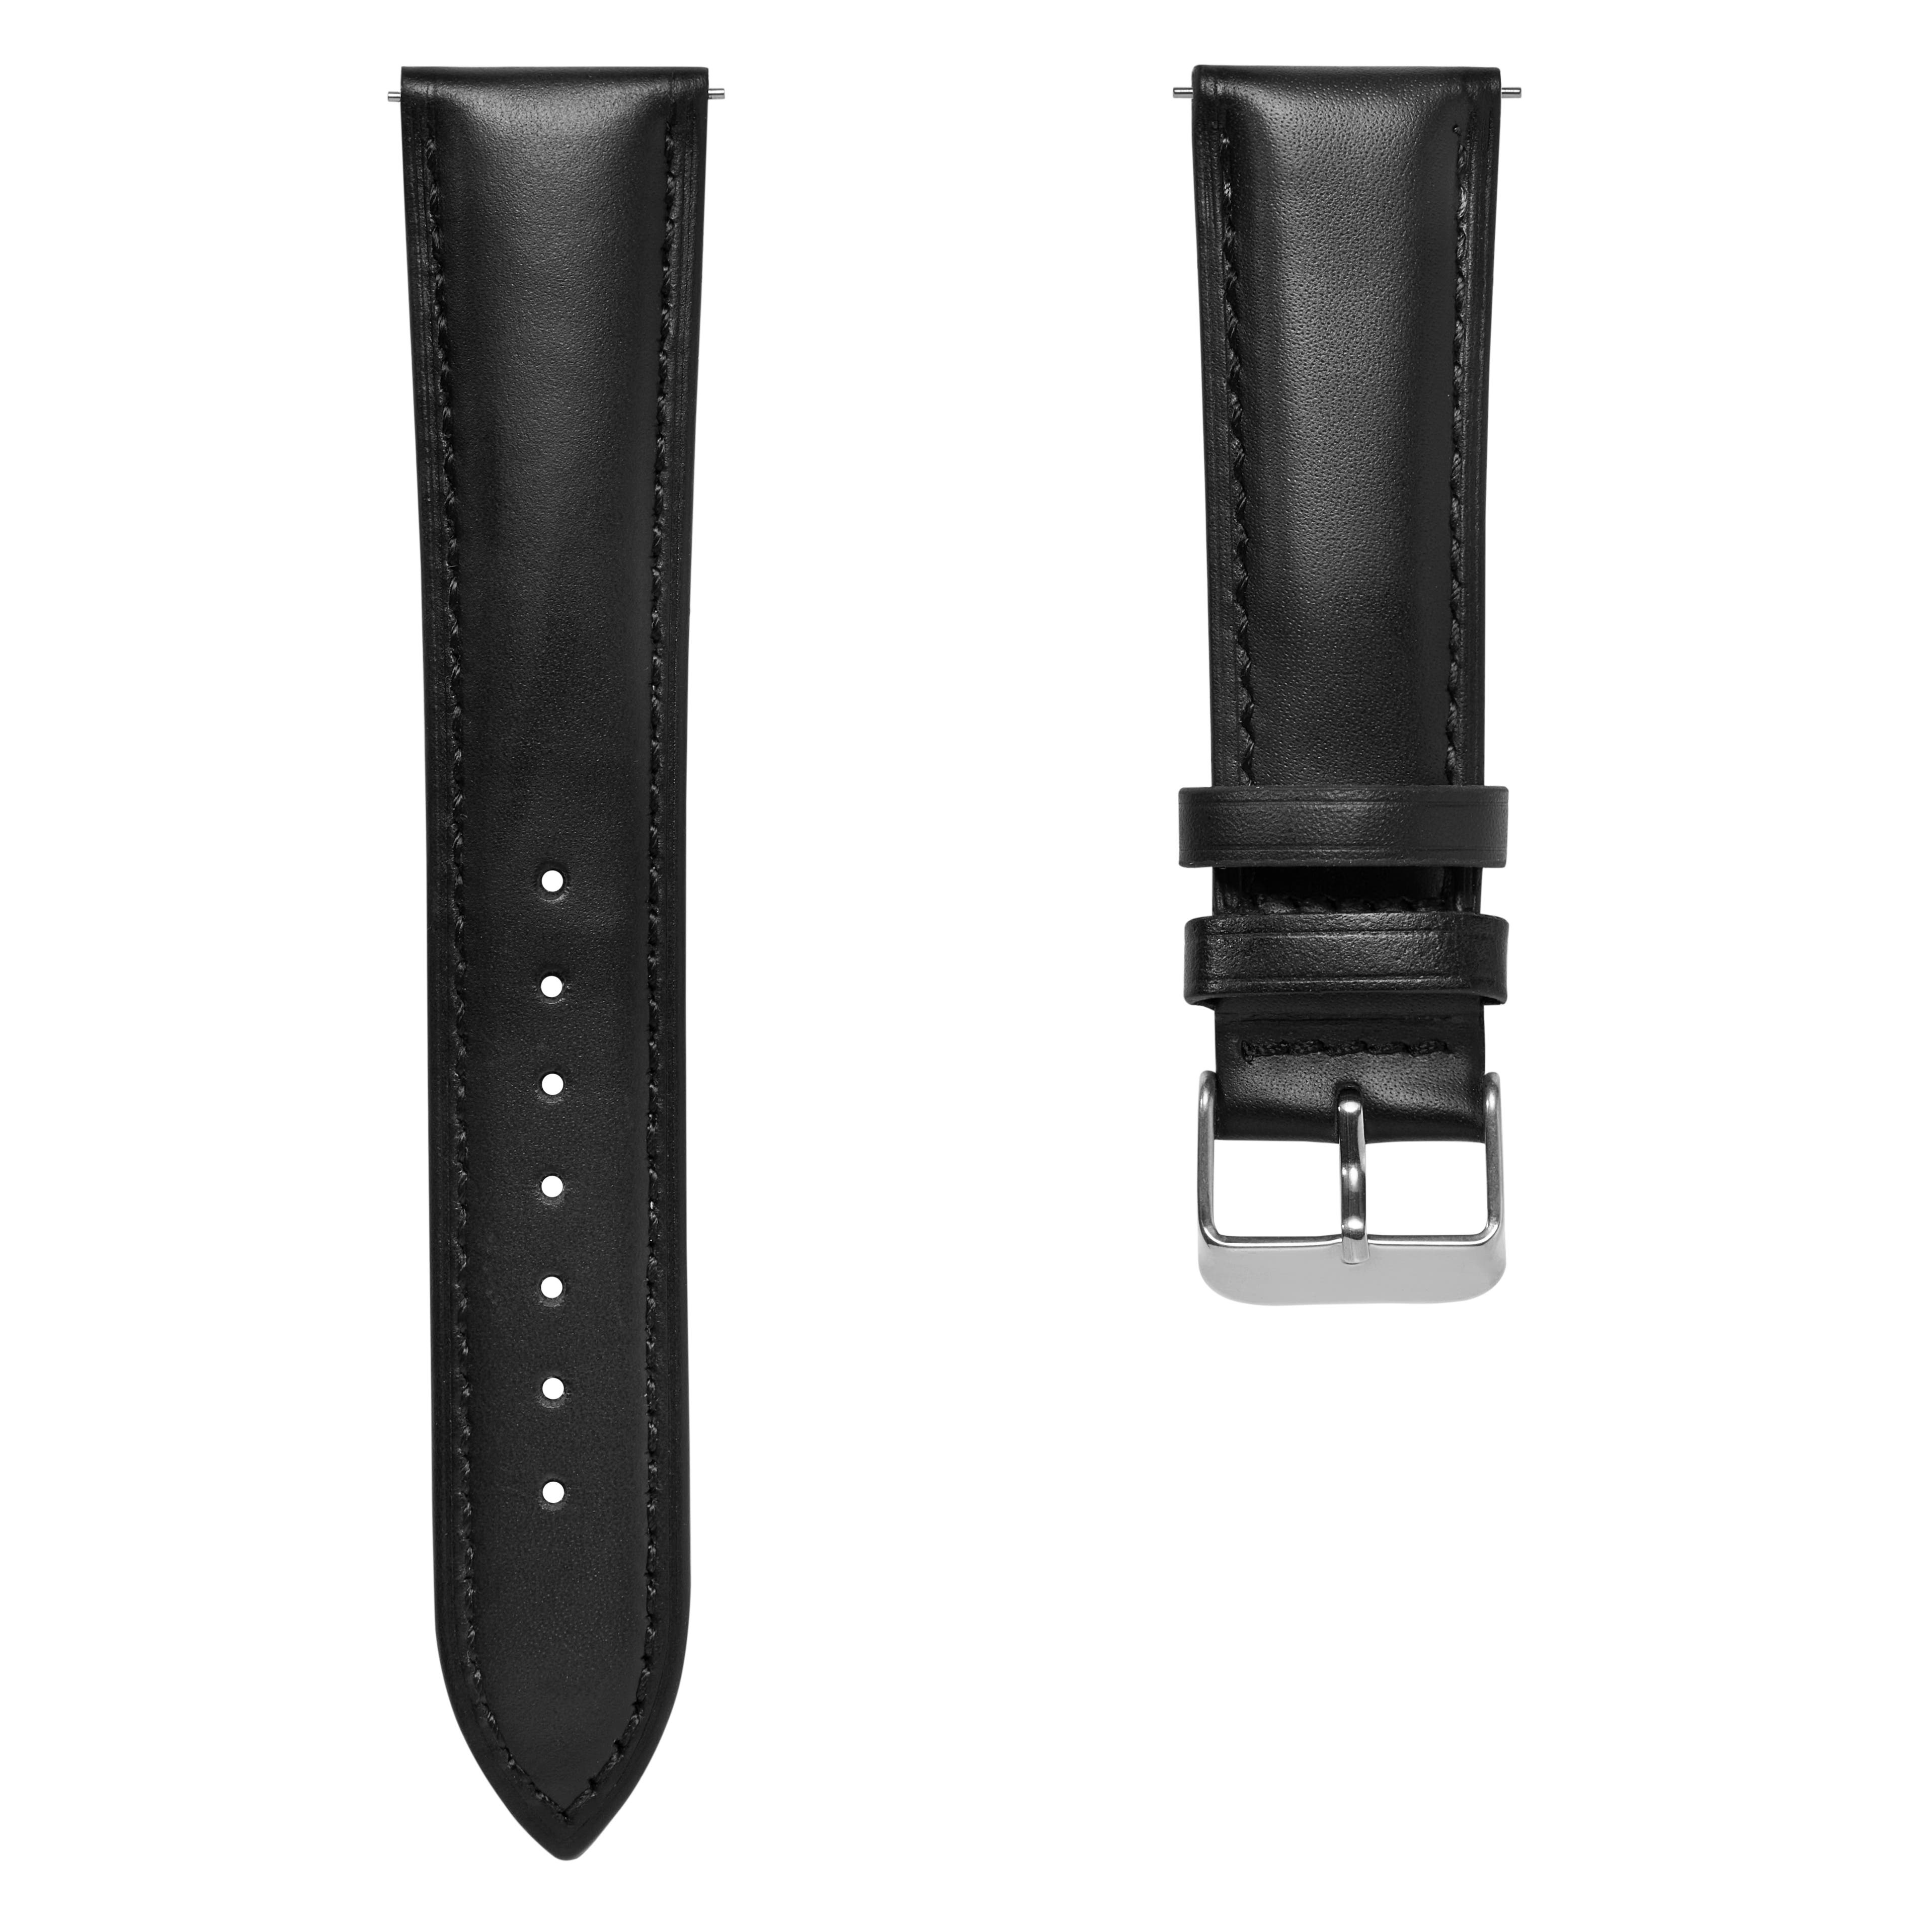 21mm Black Leather Watch Strap with Silver-Tone Buckle – Quick Release